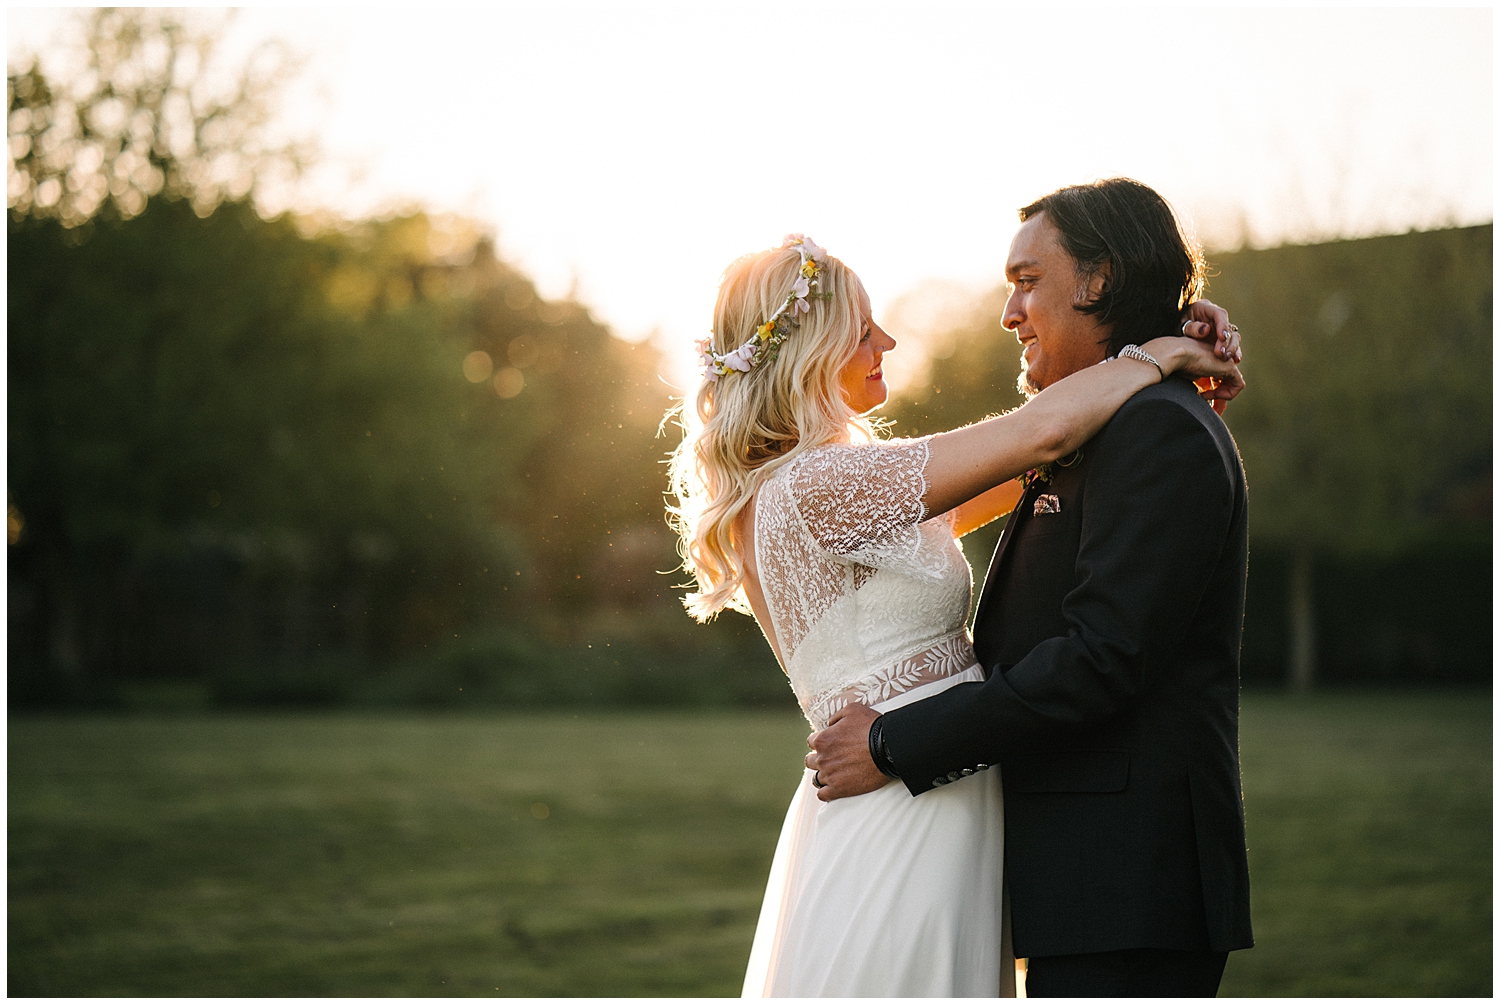 A couple during sunset at High House Weddings in Essex. Photographed by Kari Bellamy. 